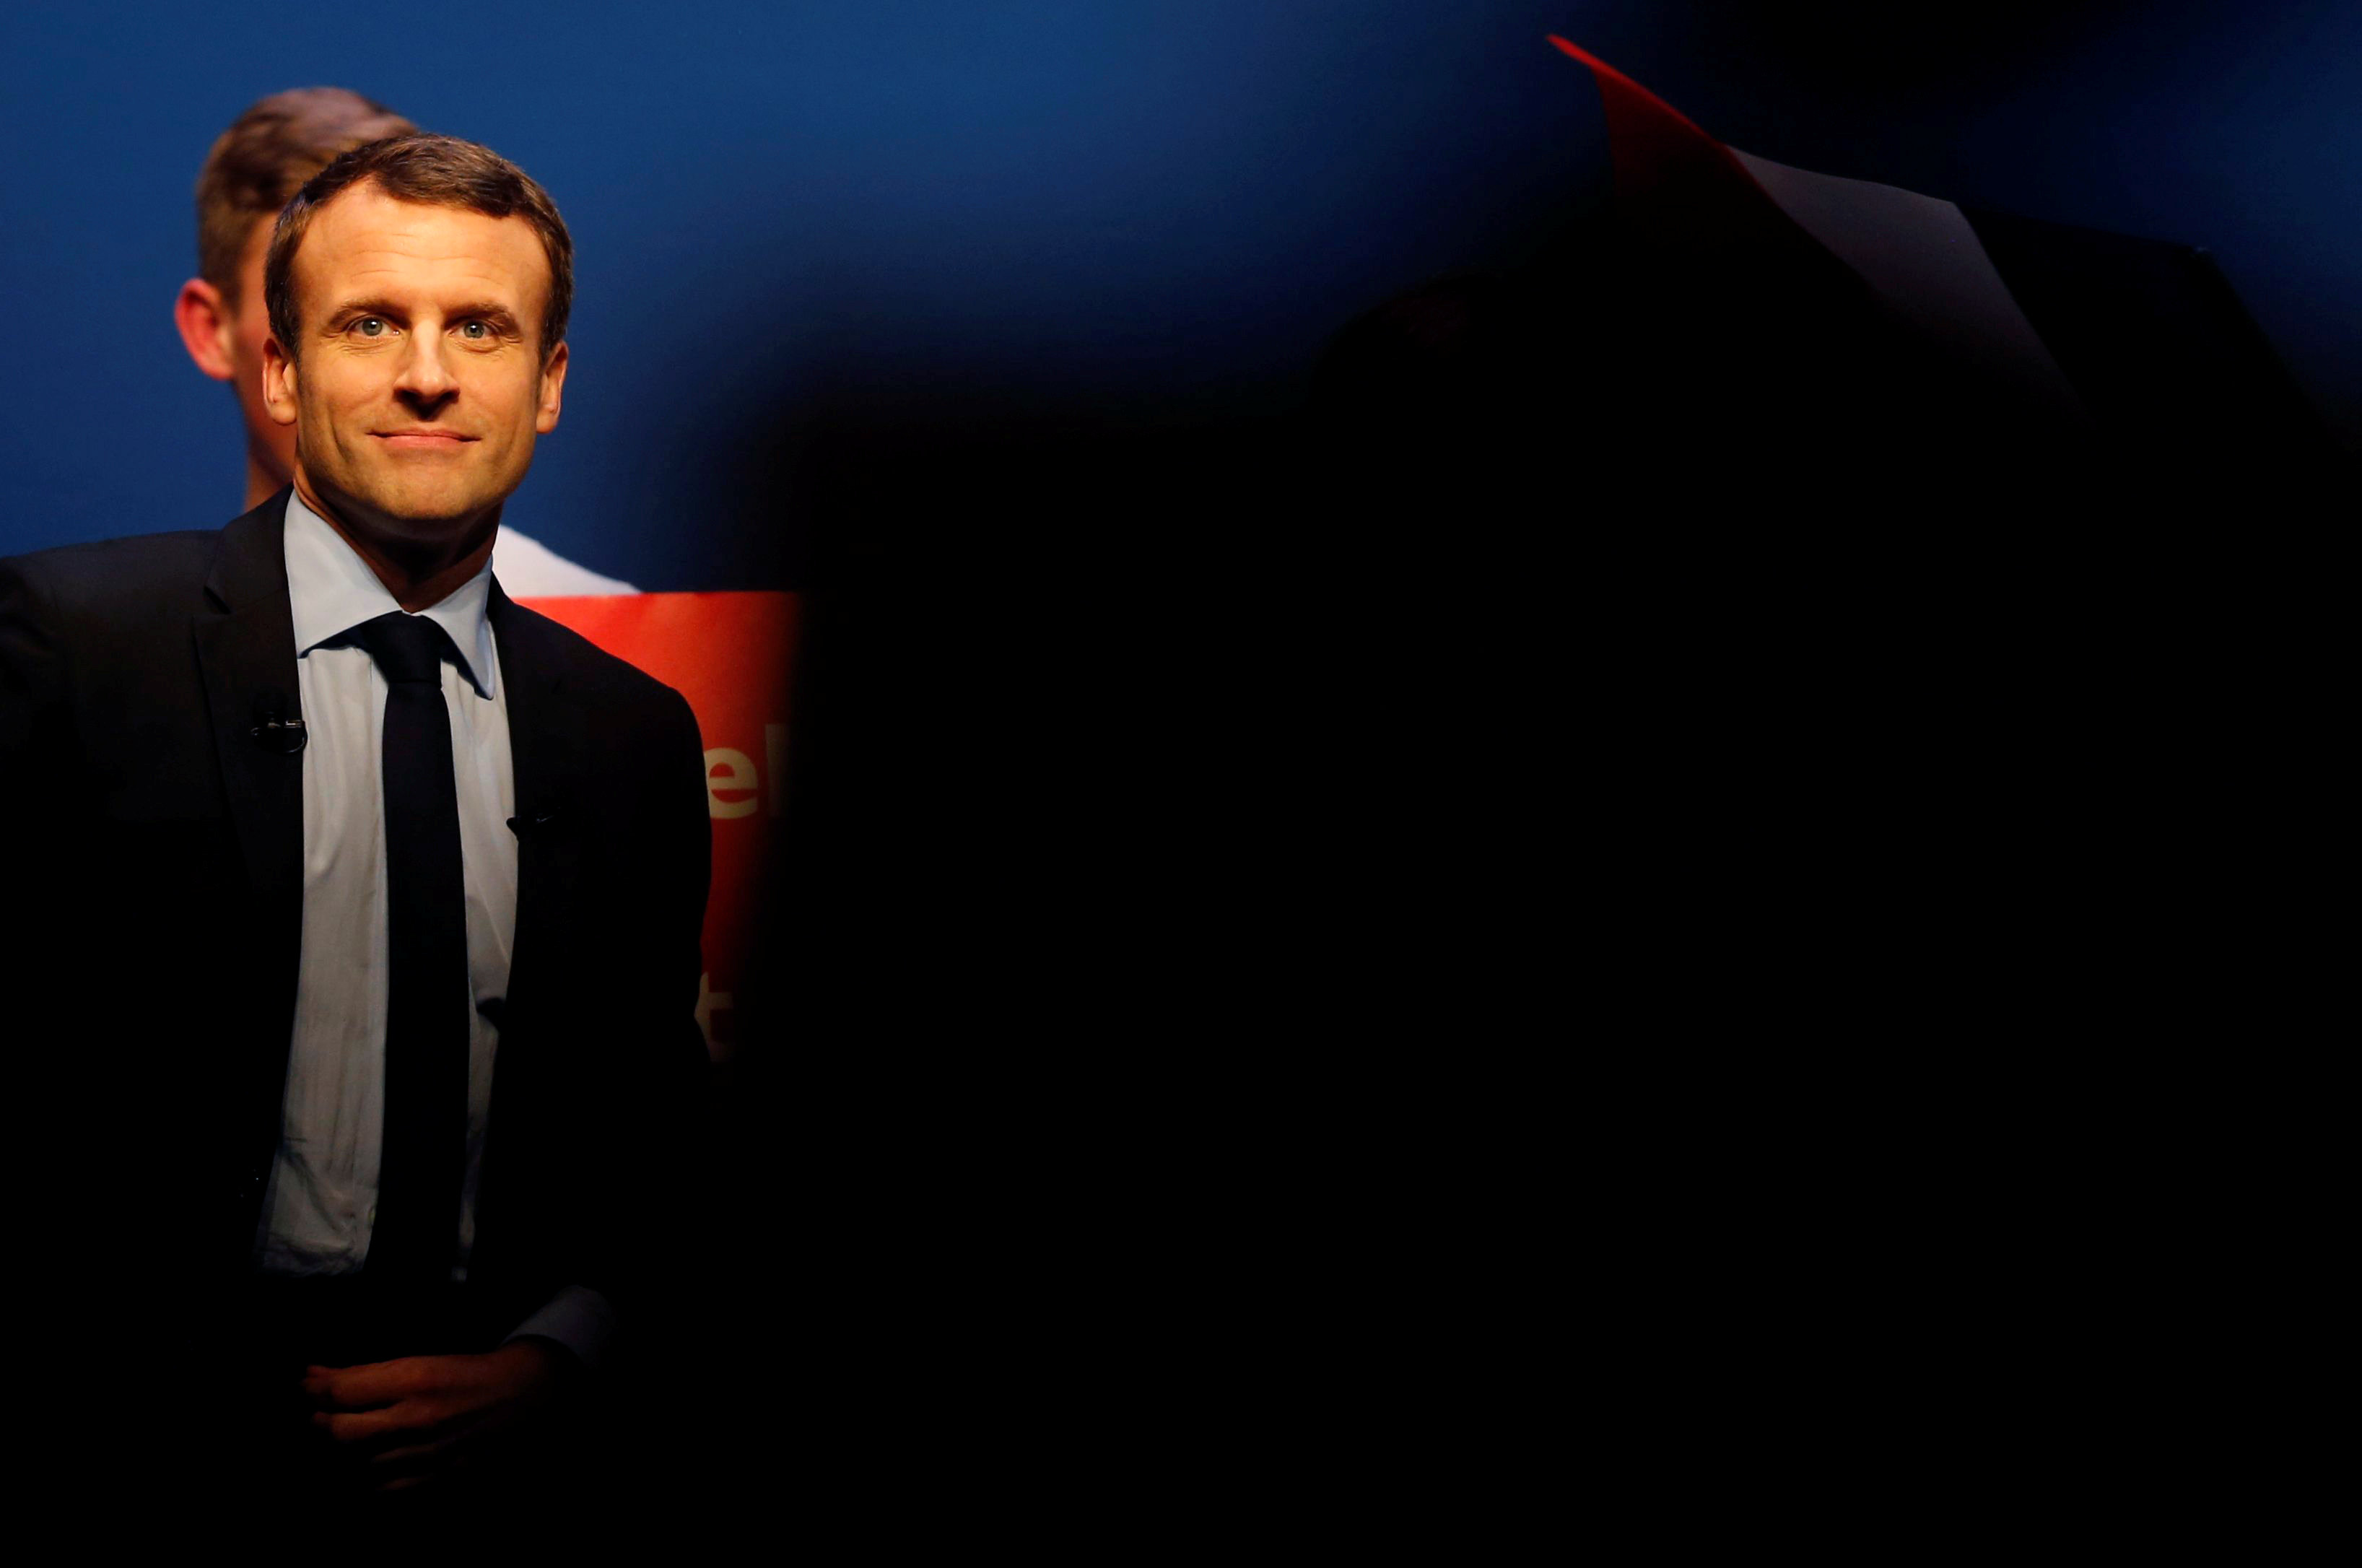 Macron strengthens core vote, seen beating Le Pen in French election